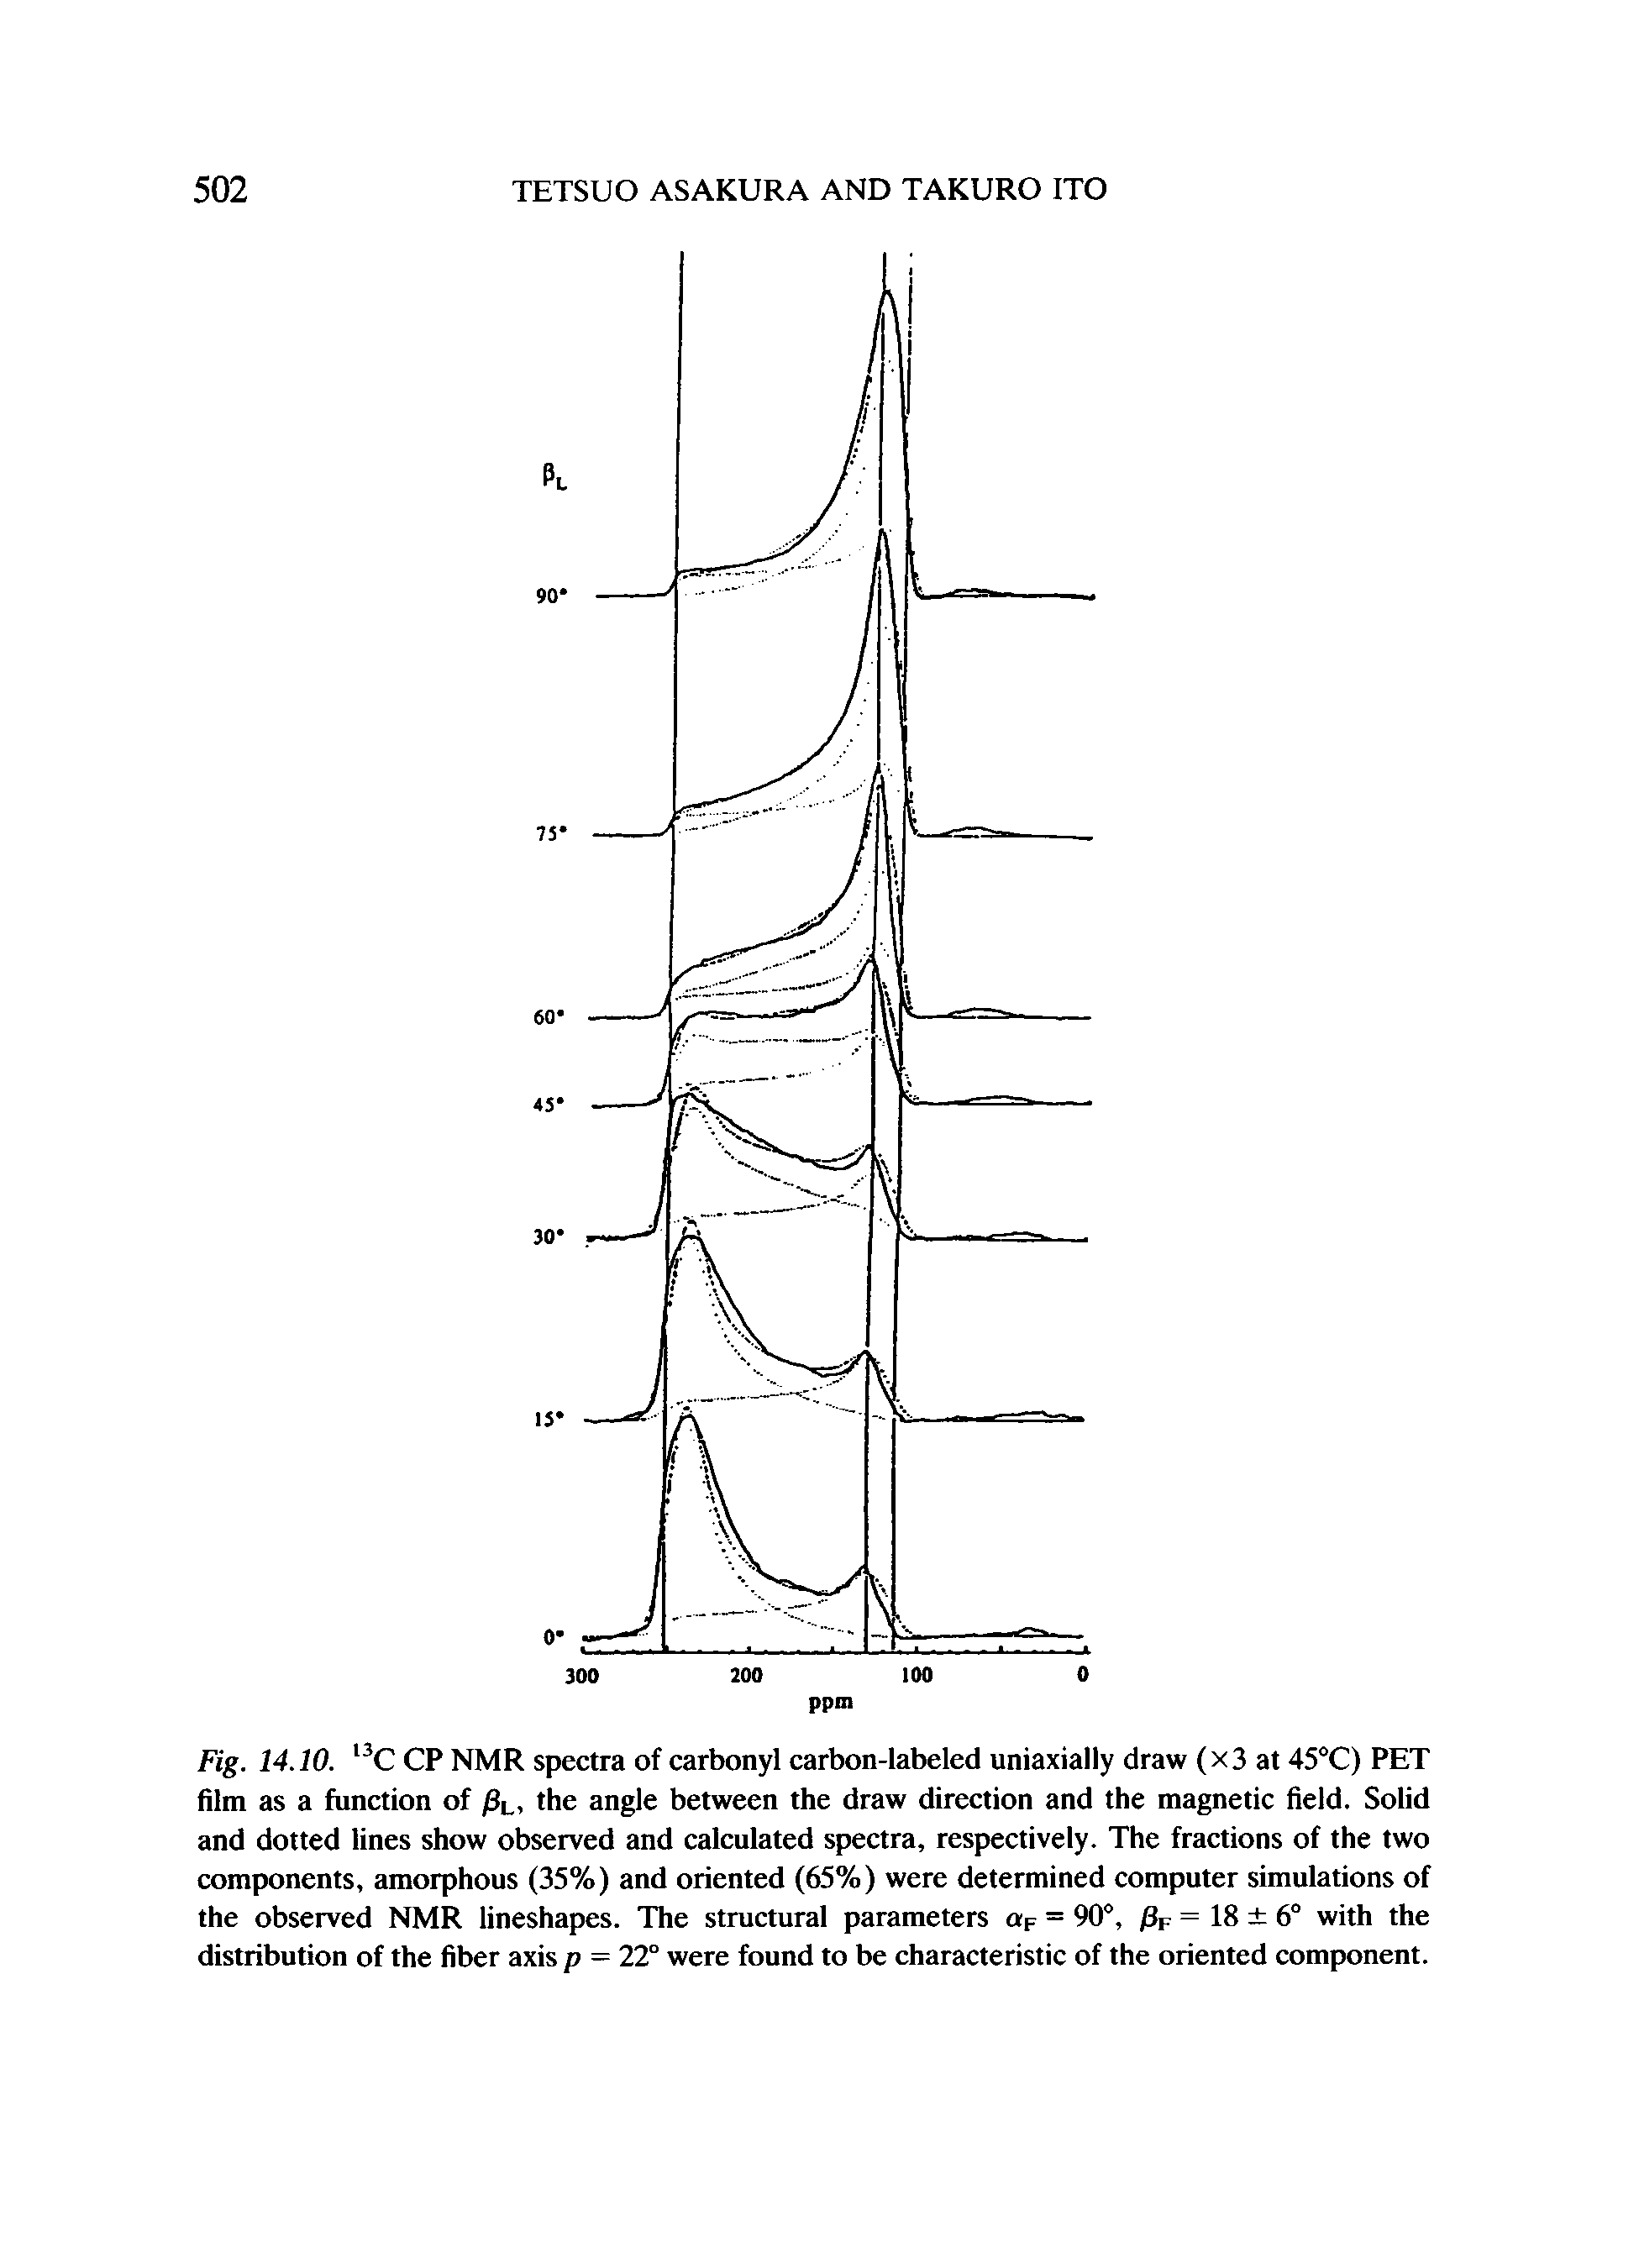 Fig. 14.10. C CP NMR spectra of carbonyl carbon-labeled uniaxially draw (x3 at 45°C) PET film as a function of /3u, the angle between the draw direction and the magnetic field. Solid and dotted lines show observed and calculated spectra, resp>ectively. The fractions of the two components, amorphous (35%) and oriented (65%) were determined computer simulations of the observed NMR lineshapes. The structural parameters ap = 90°, /3p = 18 6° with the distribution of the fiber axis p = 22° were found to be characteristic of the oriented component.